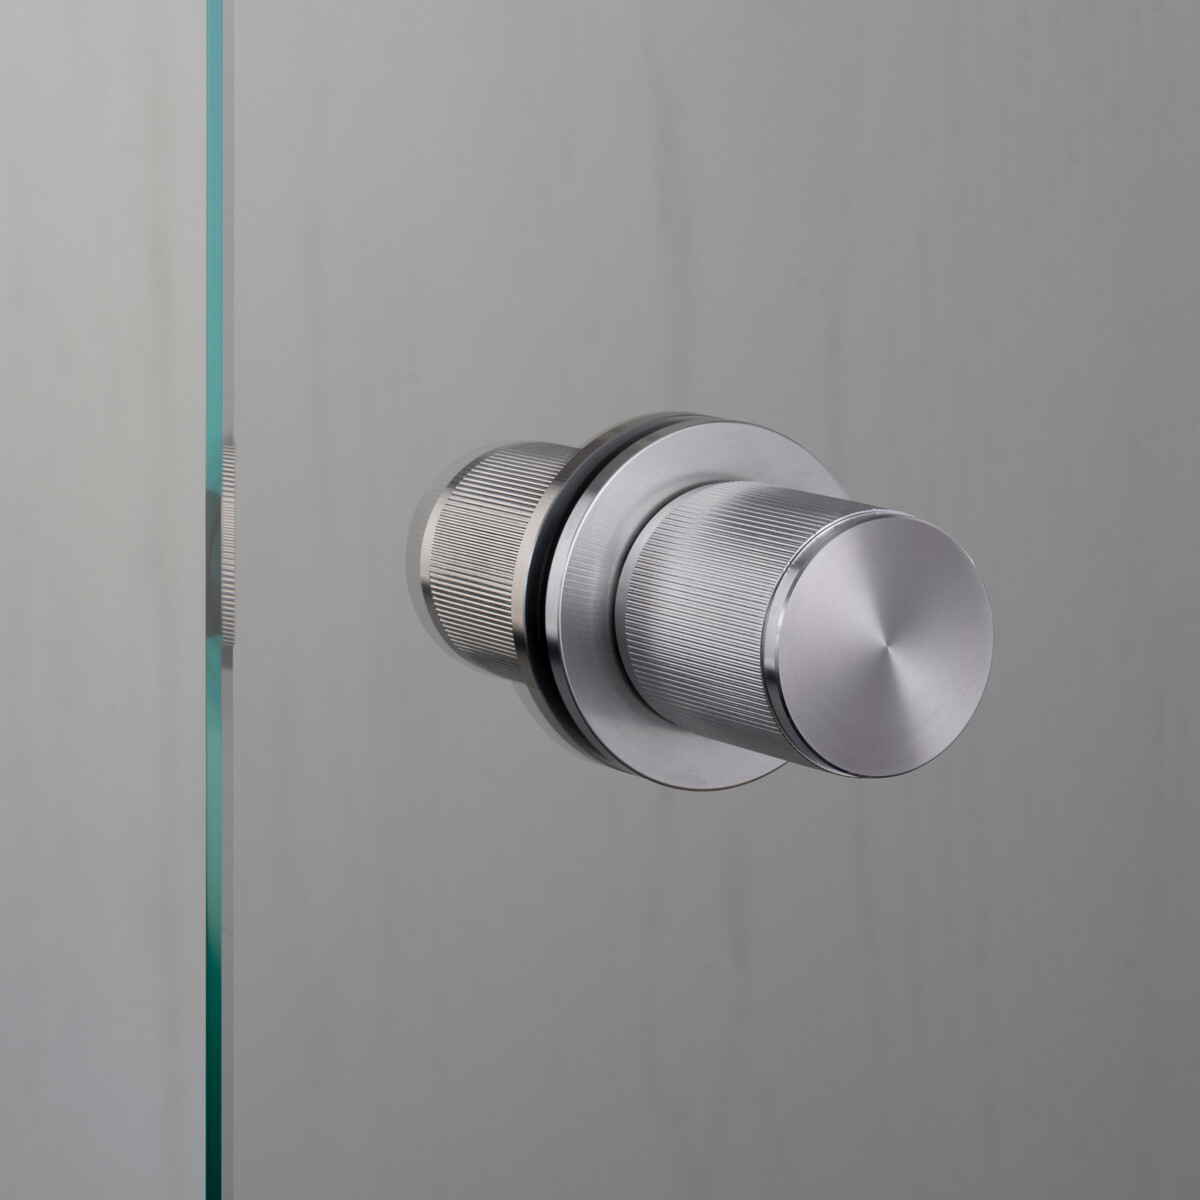 Door-knob_Fixed_Linear_Double-sided_Glass_steel_A1_Web